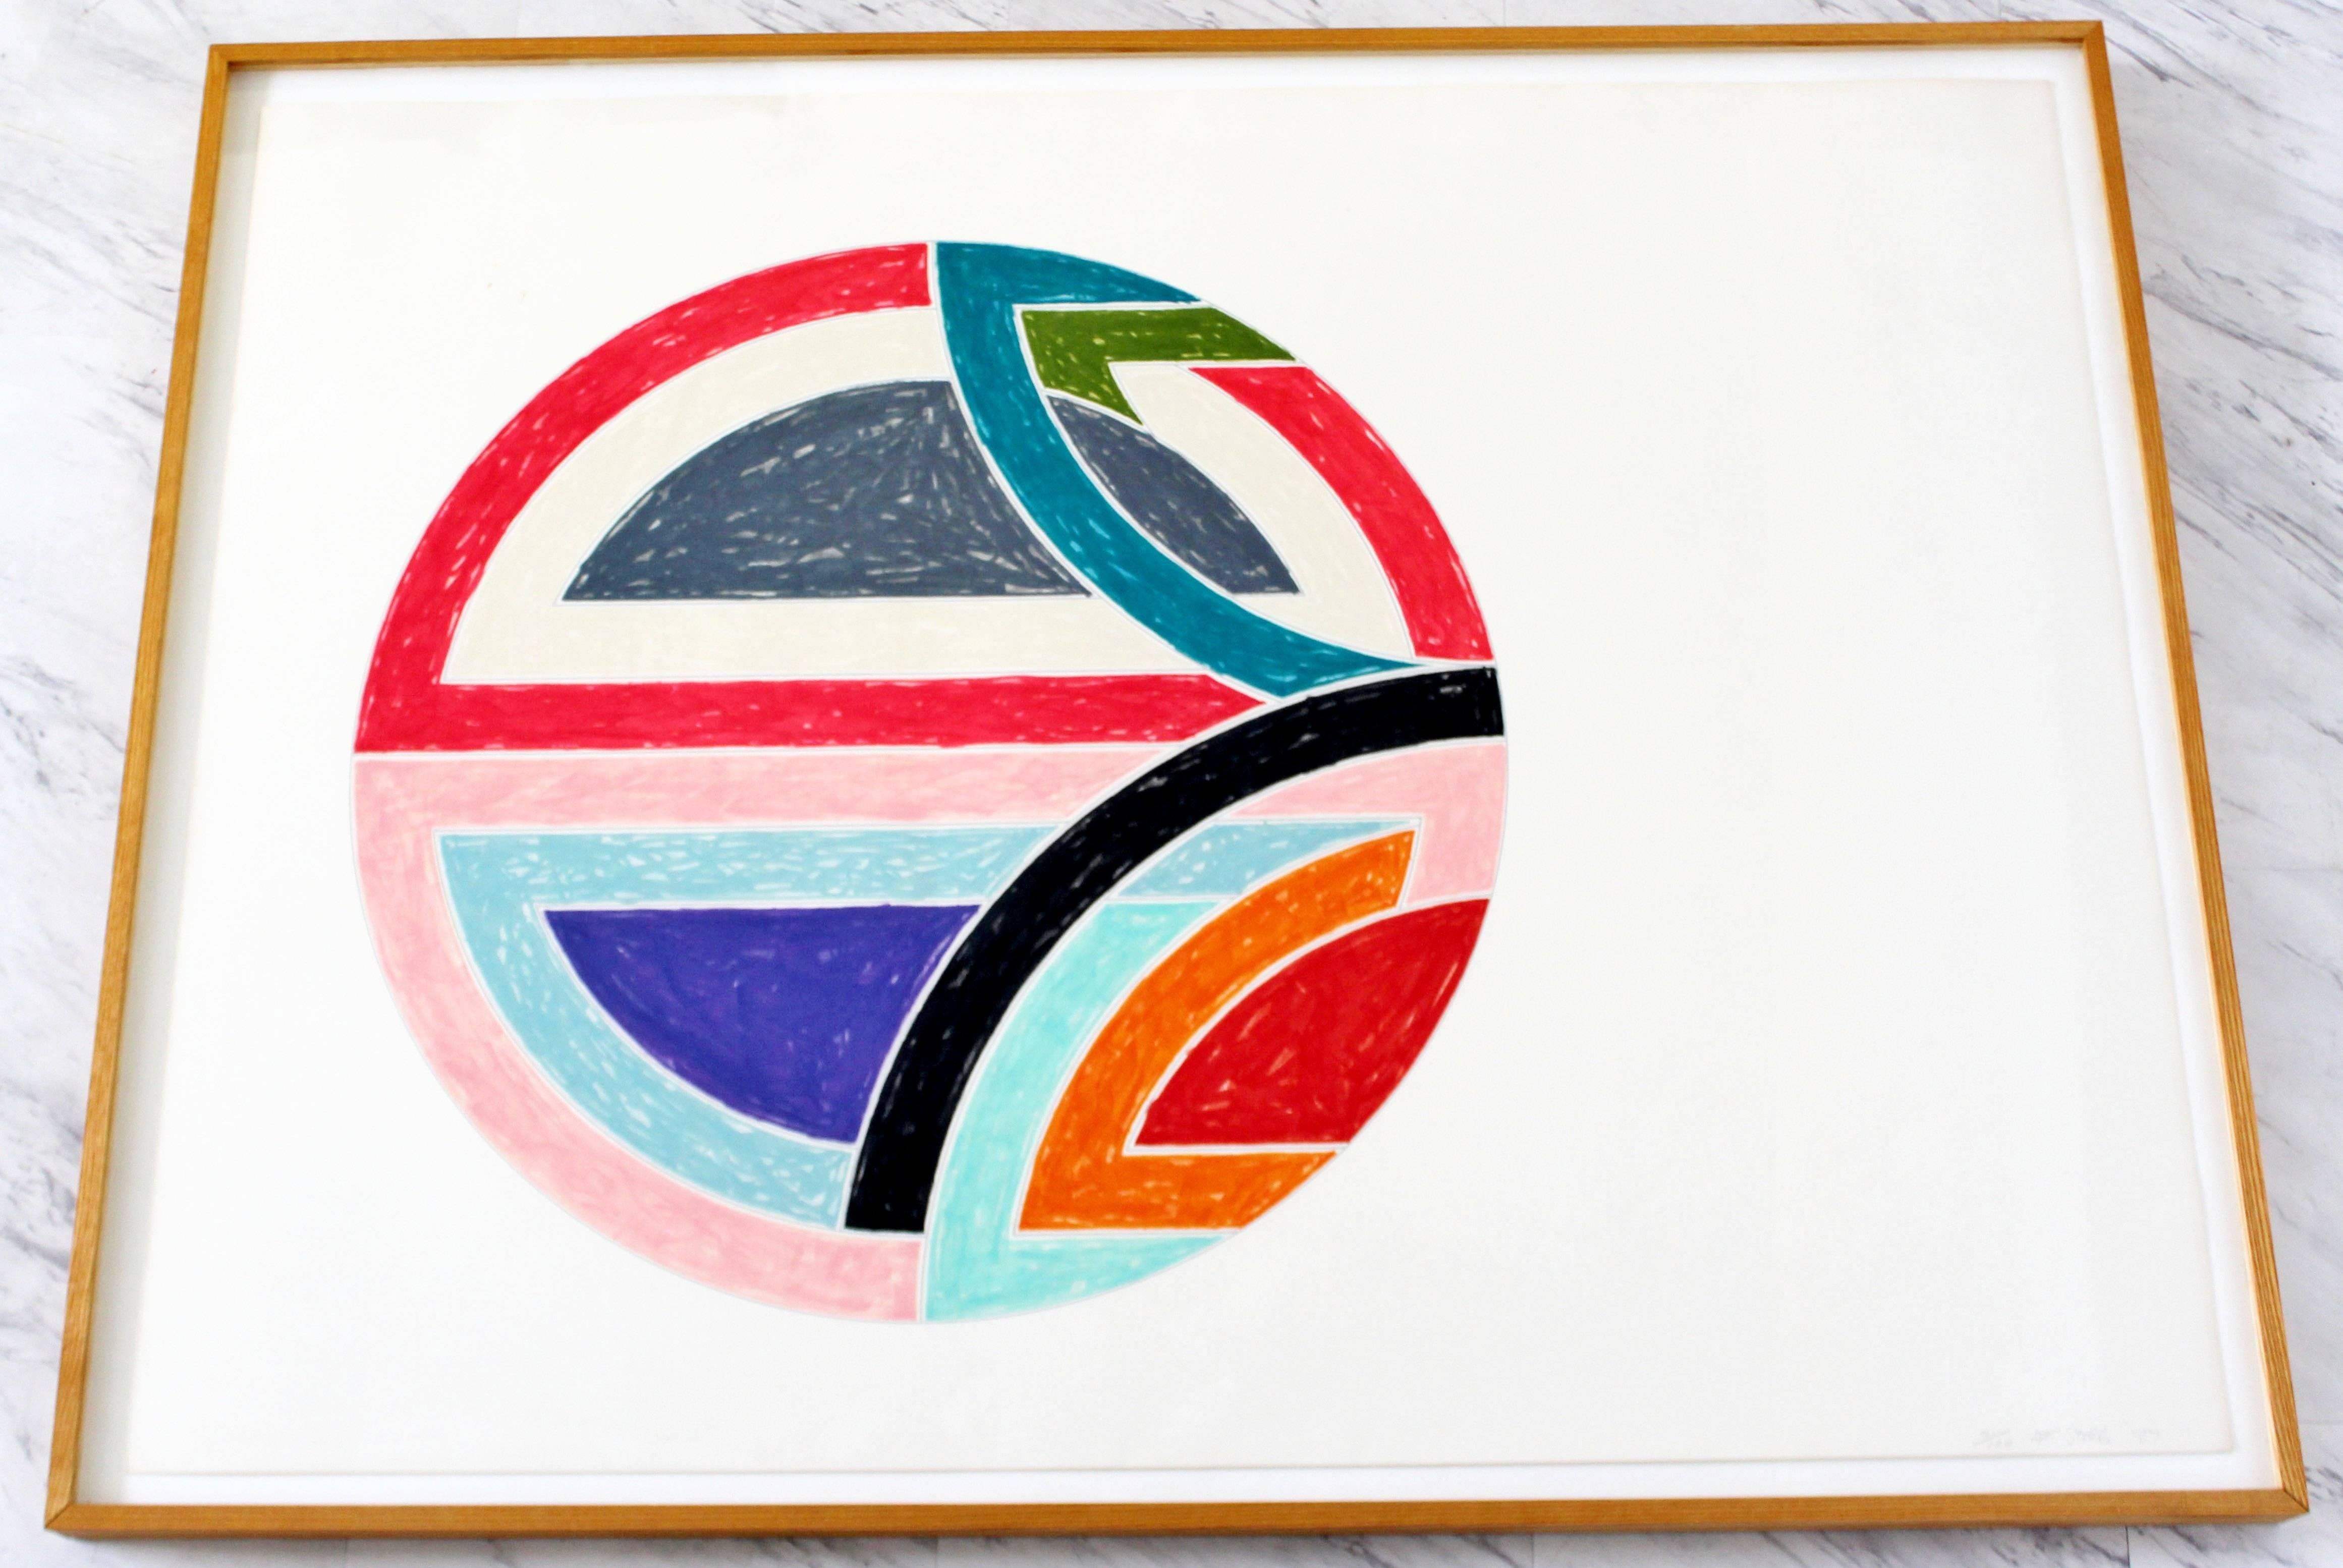 Mid-Century Modern Contemporary Frank Stella Sinjerli Variations 1A Signed Lithograph 1977 9/100